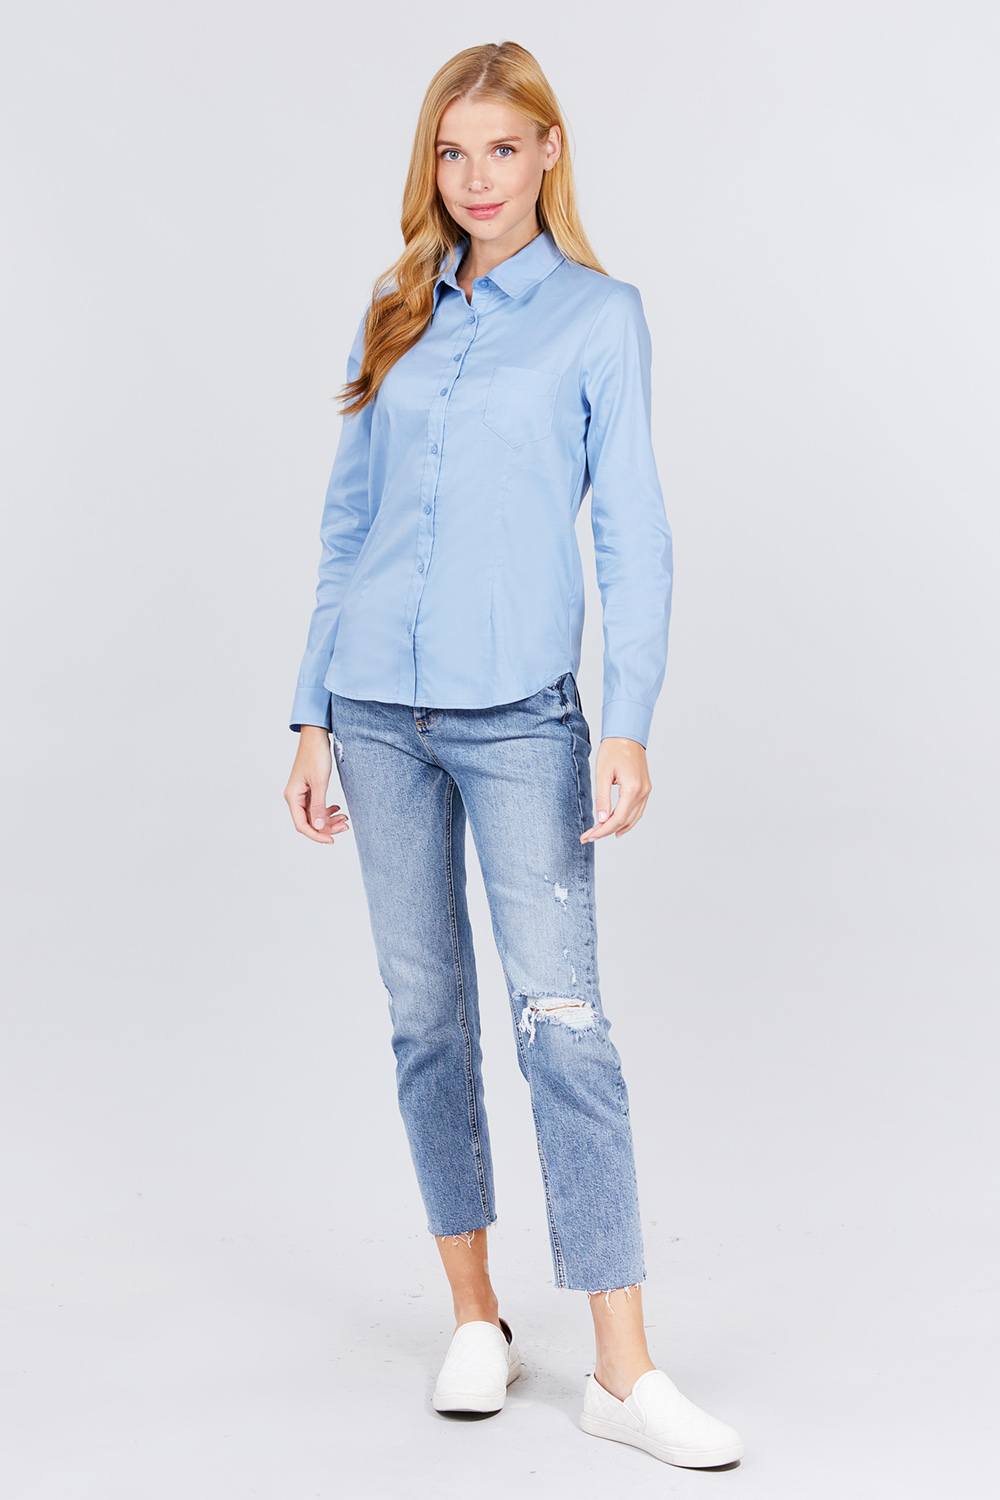 Long Sleeves Women Button Down Woven Shirts Business Formal Work Tops in Blue